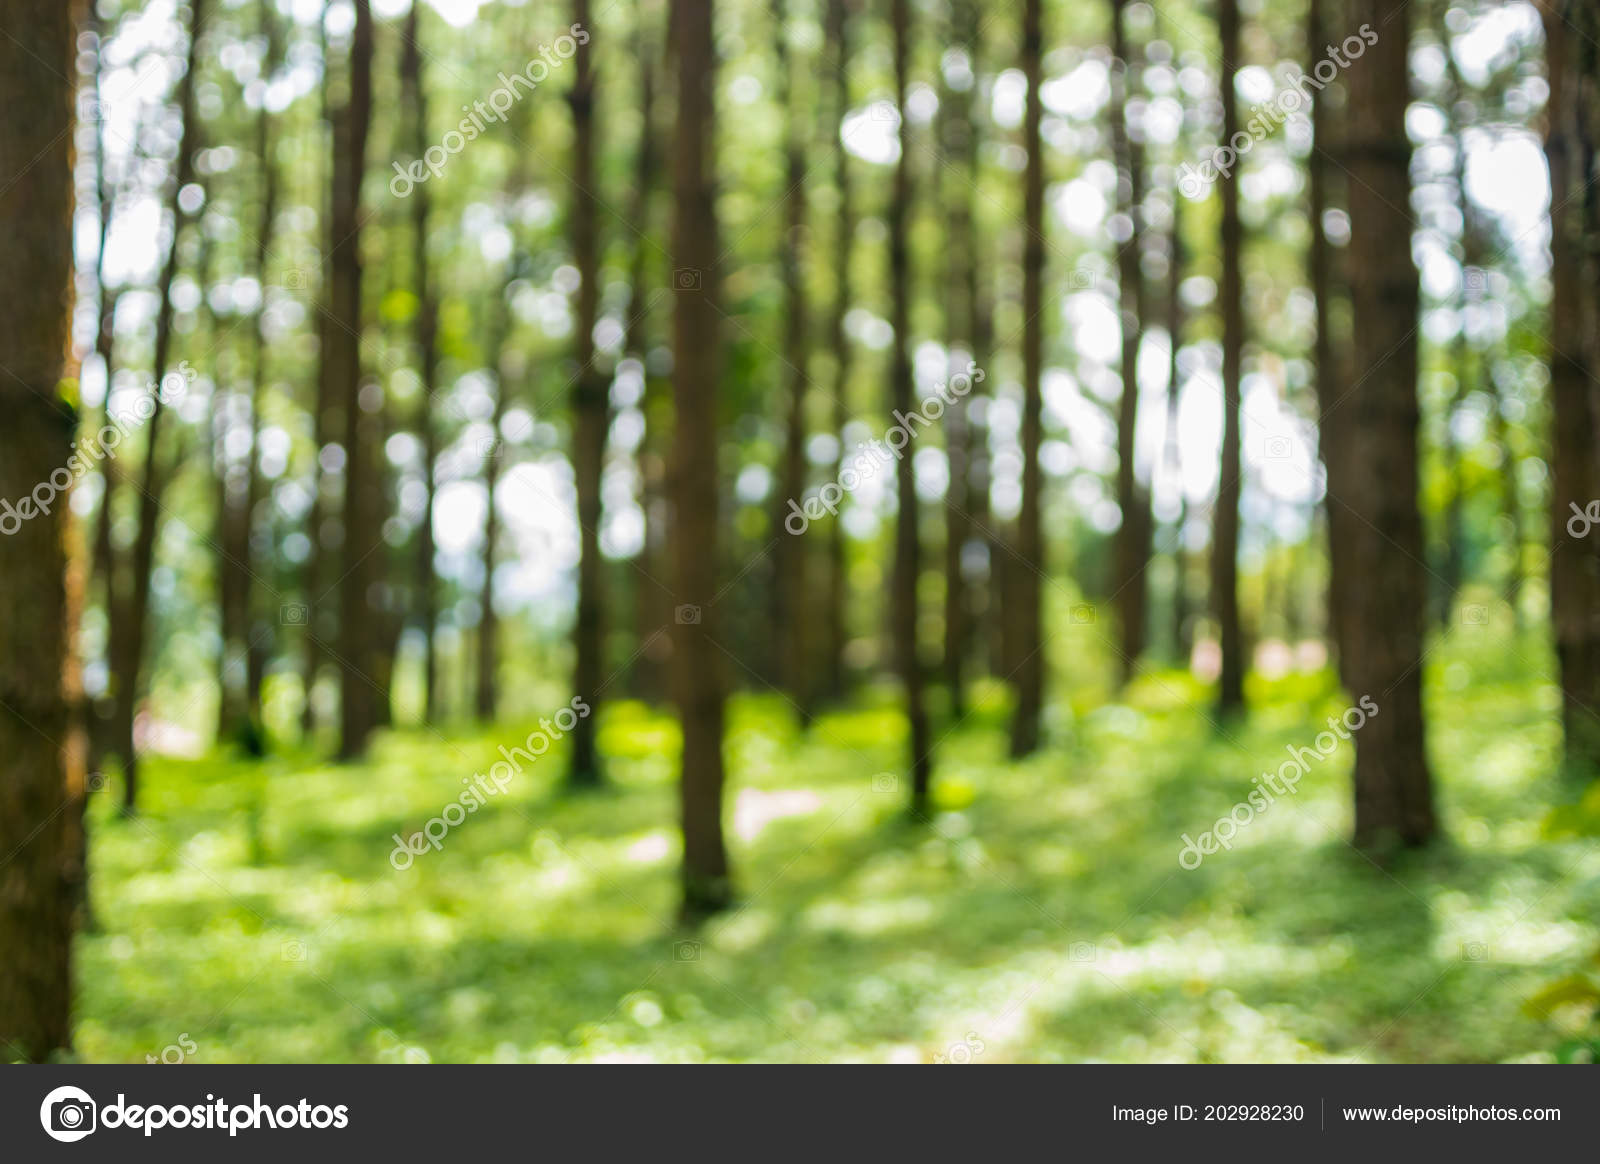 Blurred Background Image Pine Trees Forest Select Blur Focus Stock Photo by  ©nirutdps 202928230